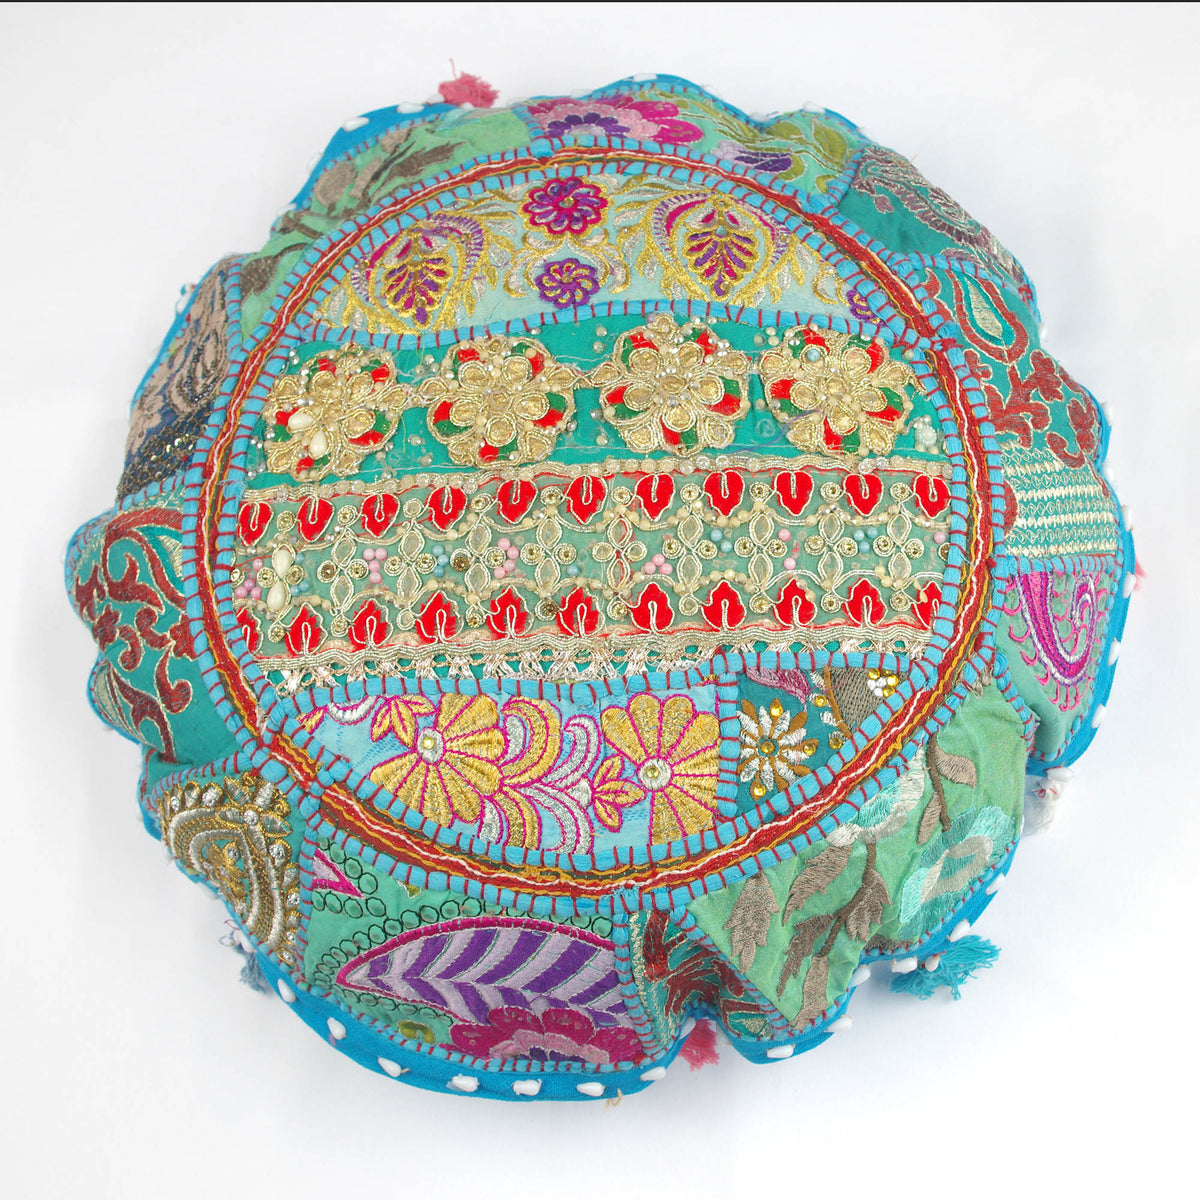 Sky Blue With Red Booti Round Floor Embroidered Patchwork Pouf Ottoman Indian Vintage Cushion Cover 18"